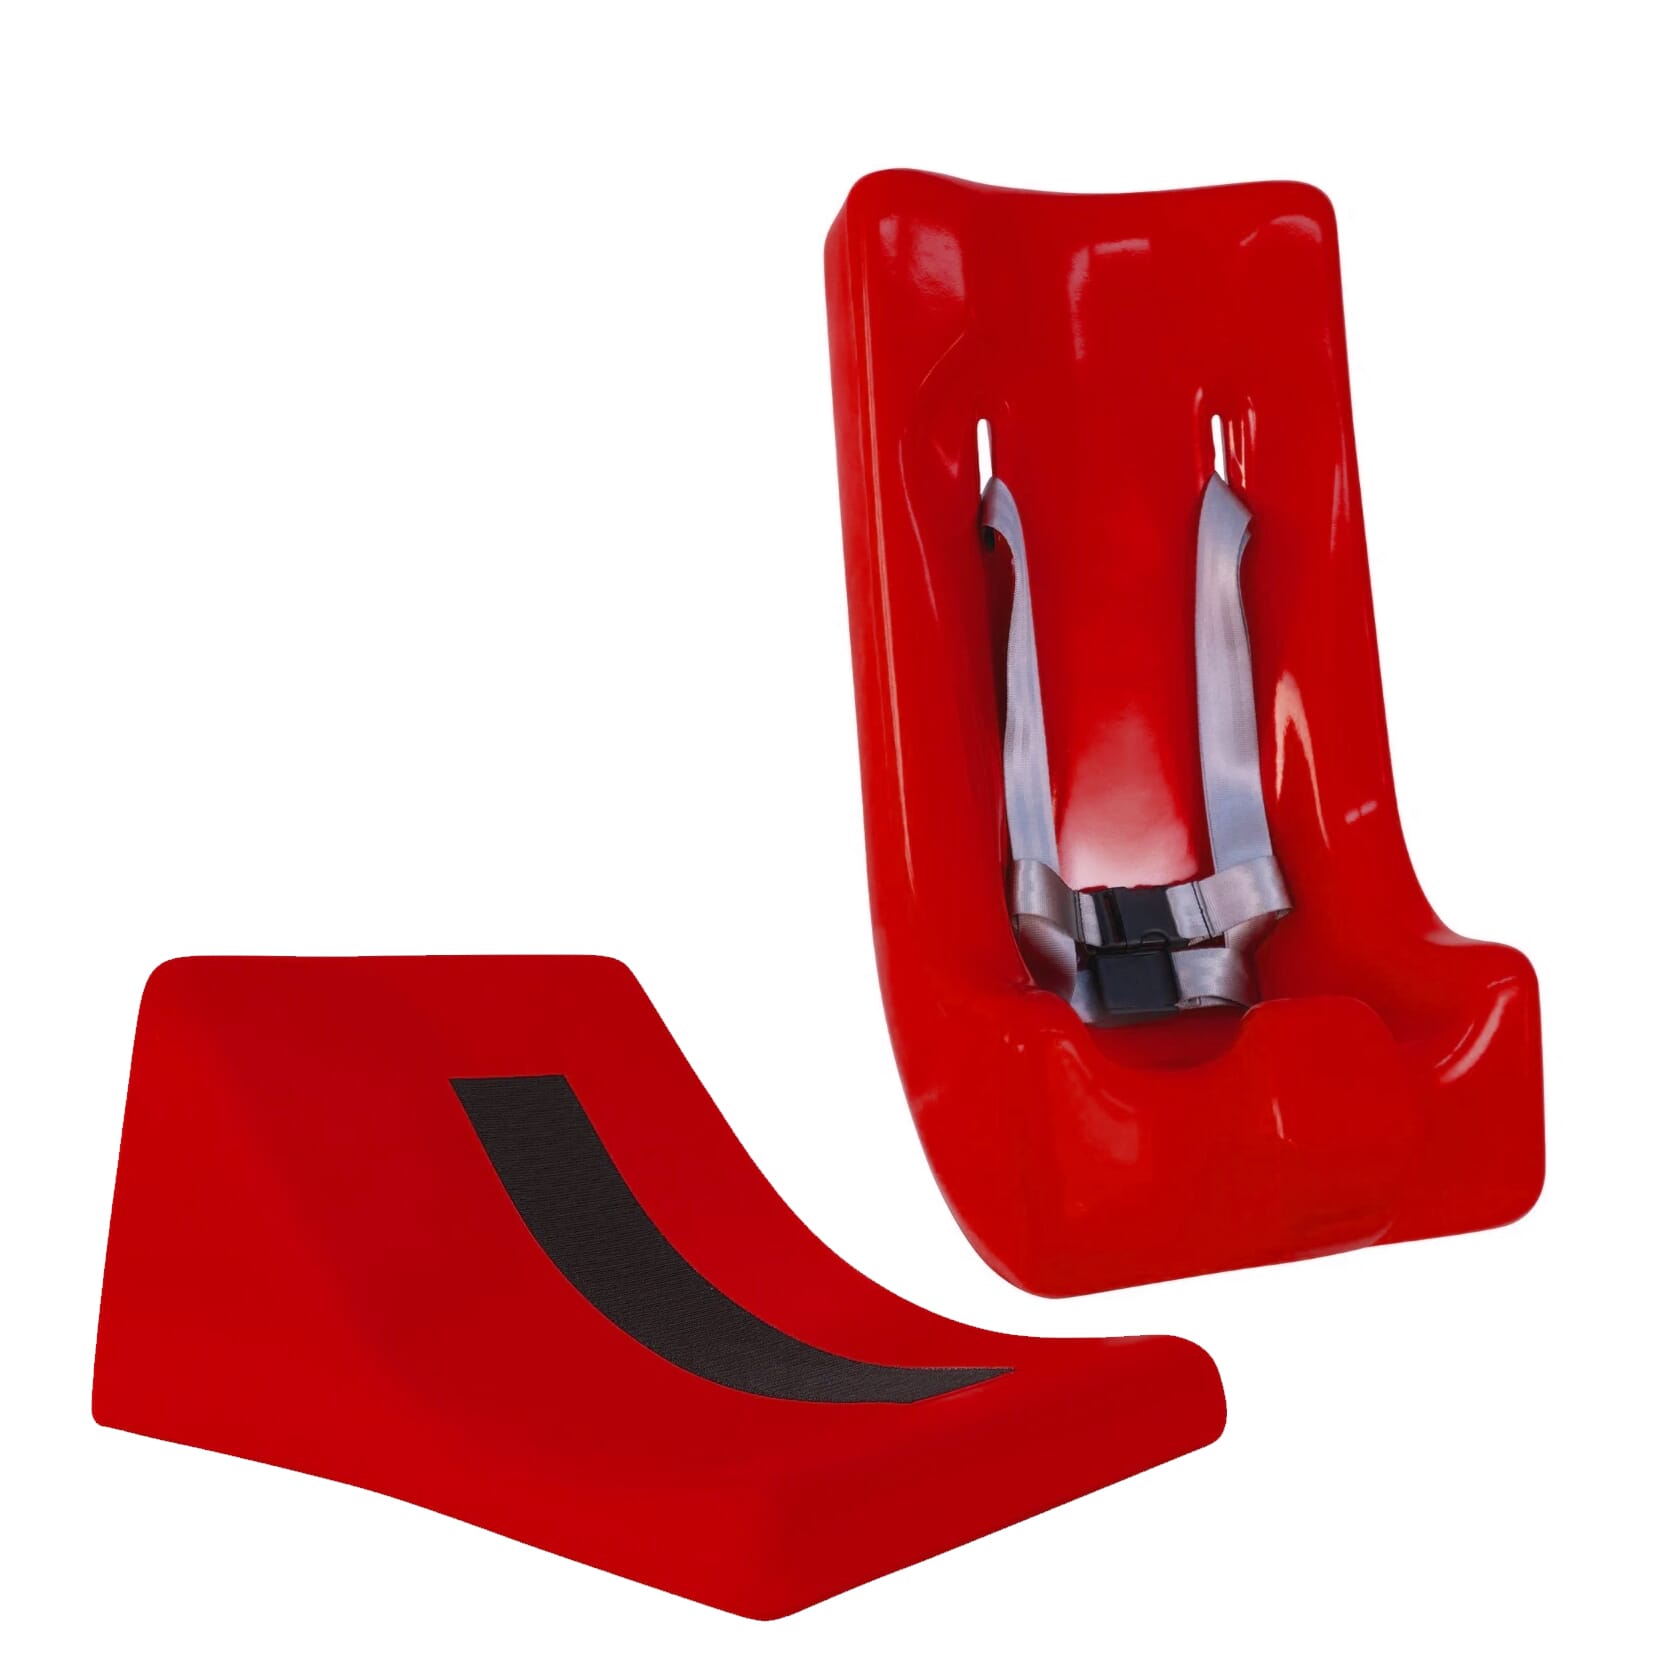 View Tumble Forms Deluxe Floor Sitter Set Medium Red information